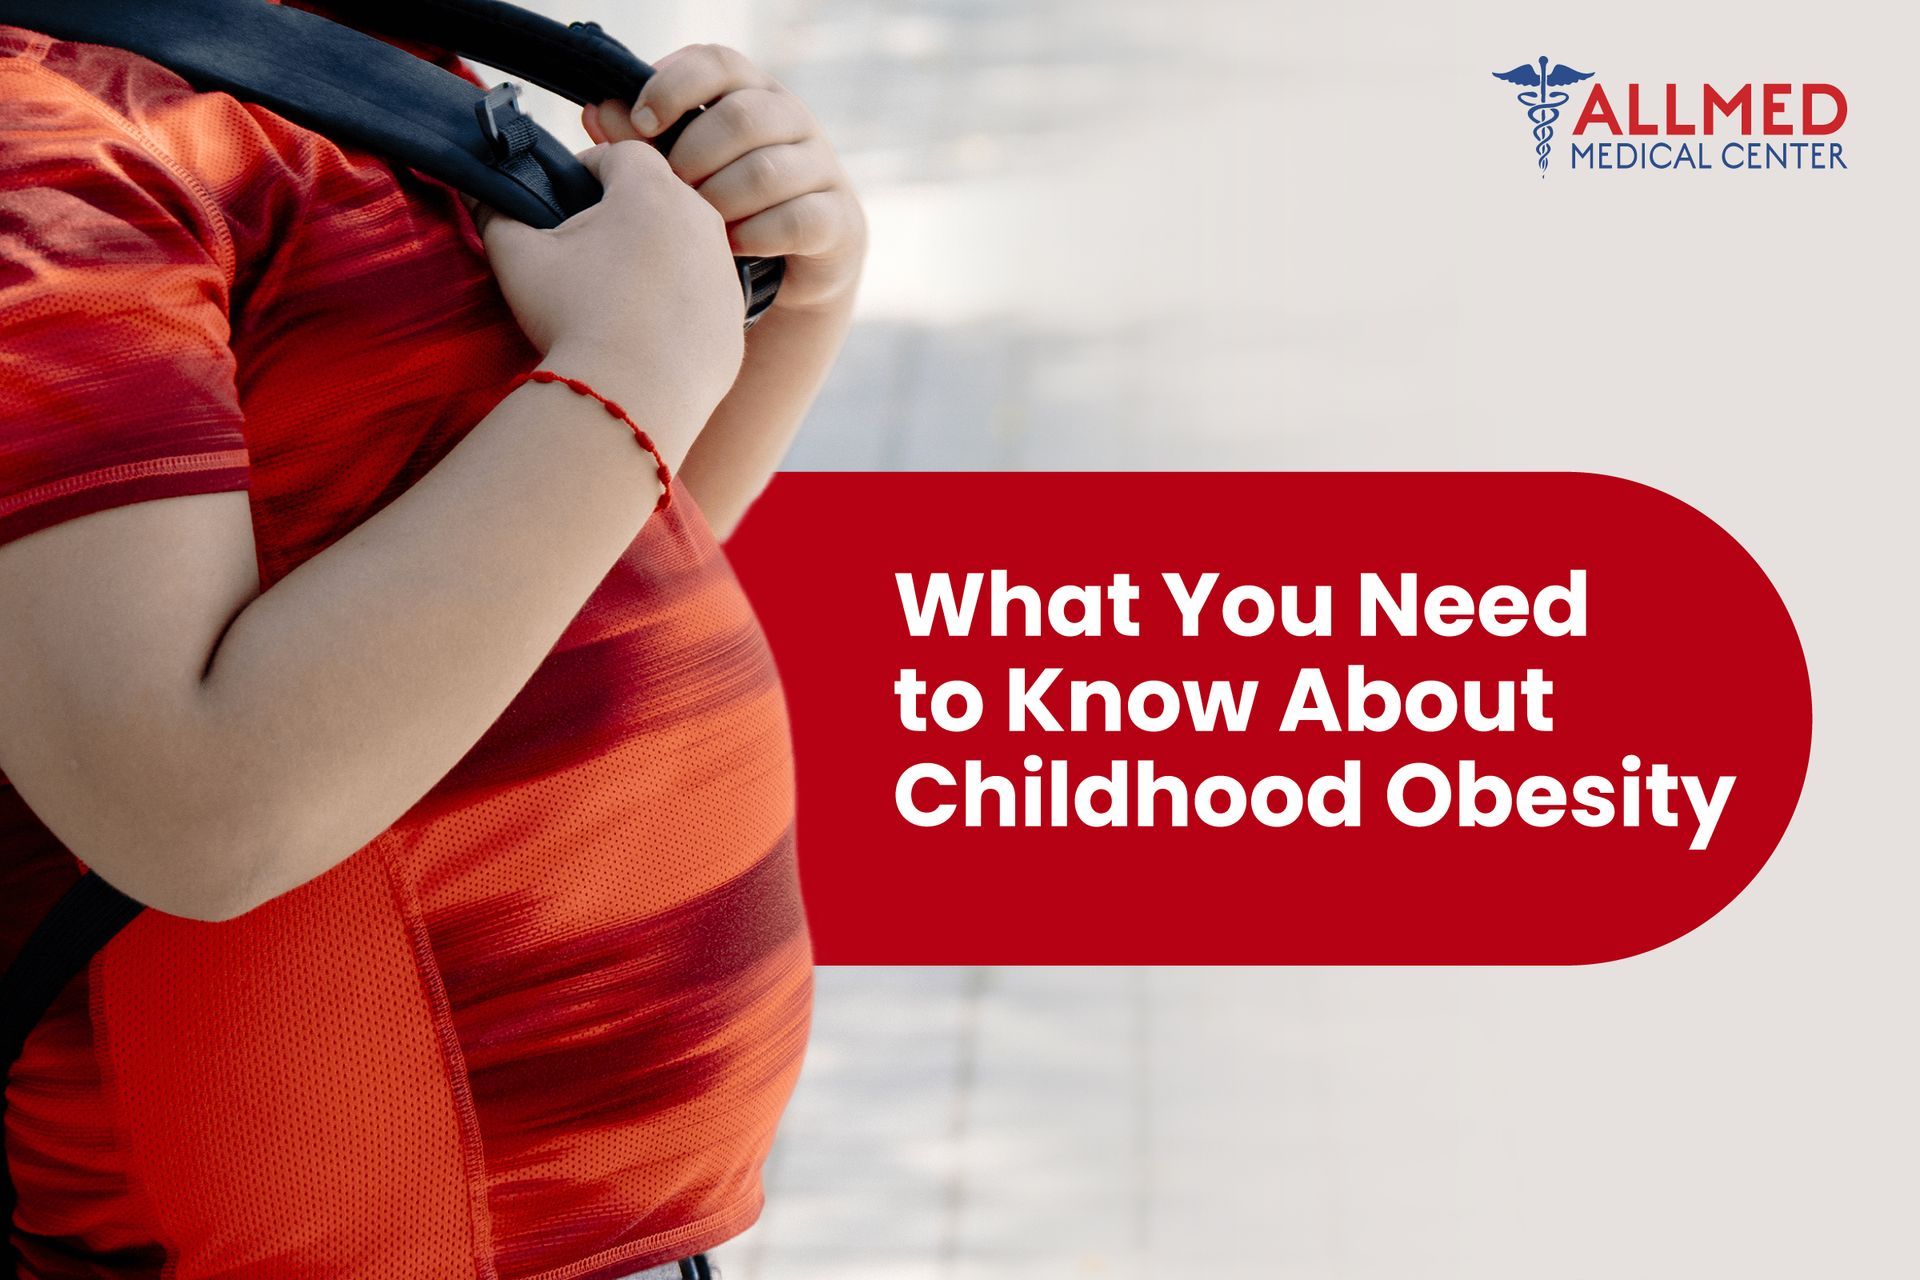 What You Need to Know About Childhood Obesity